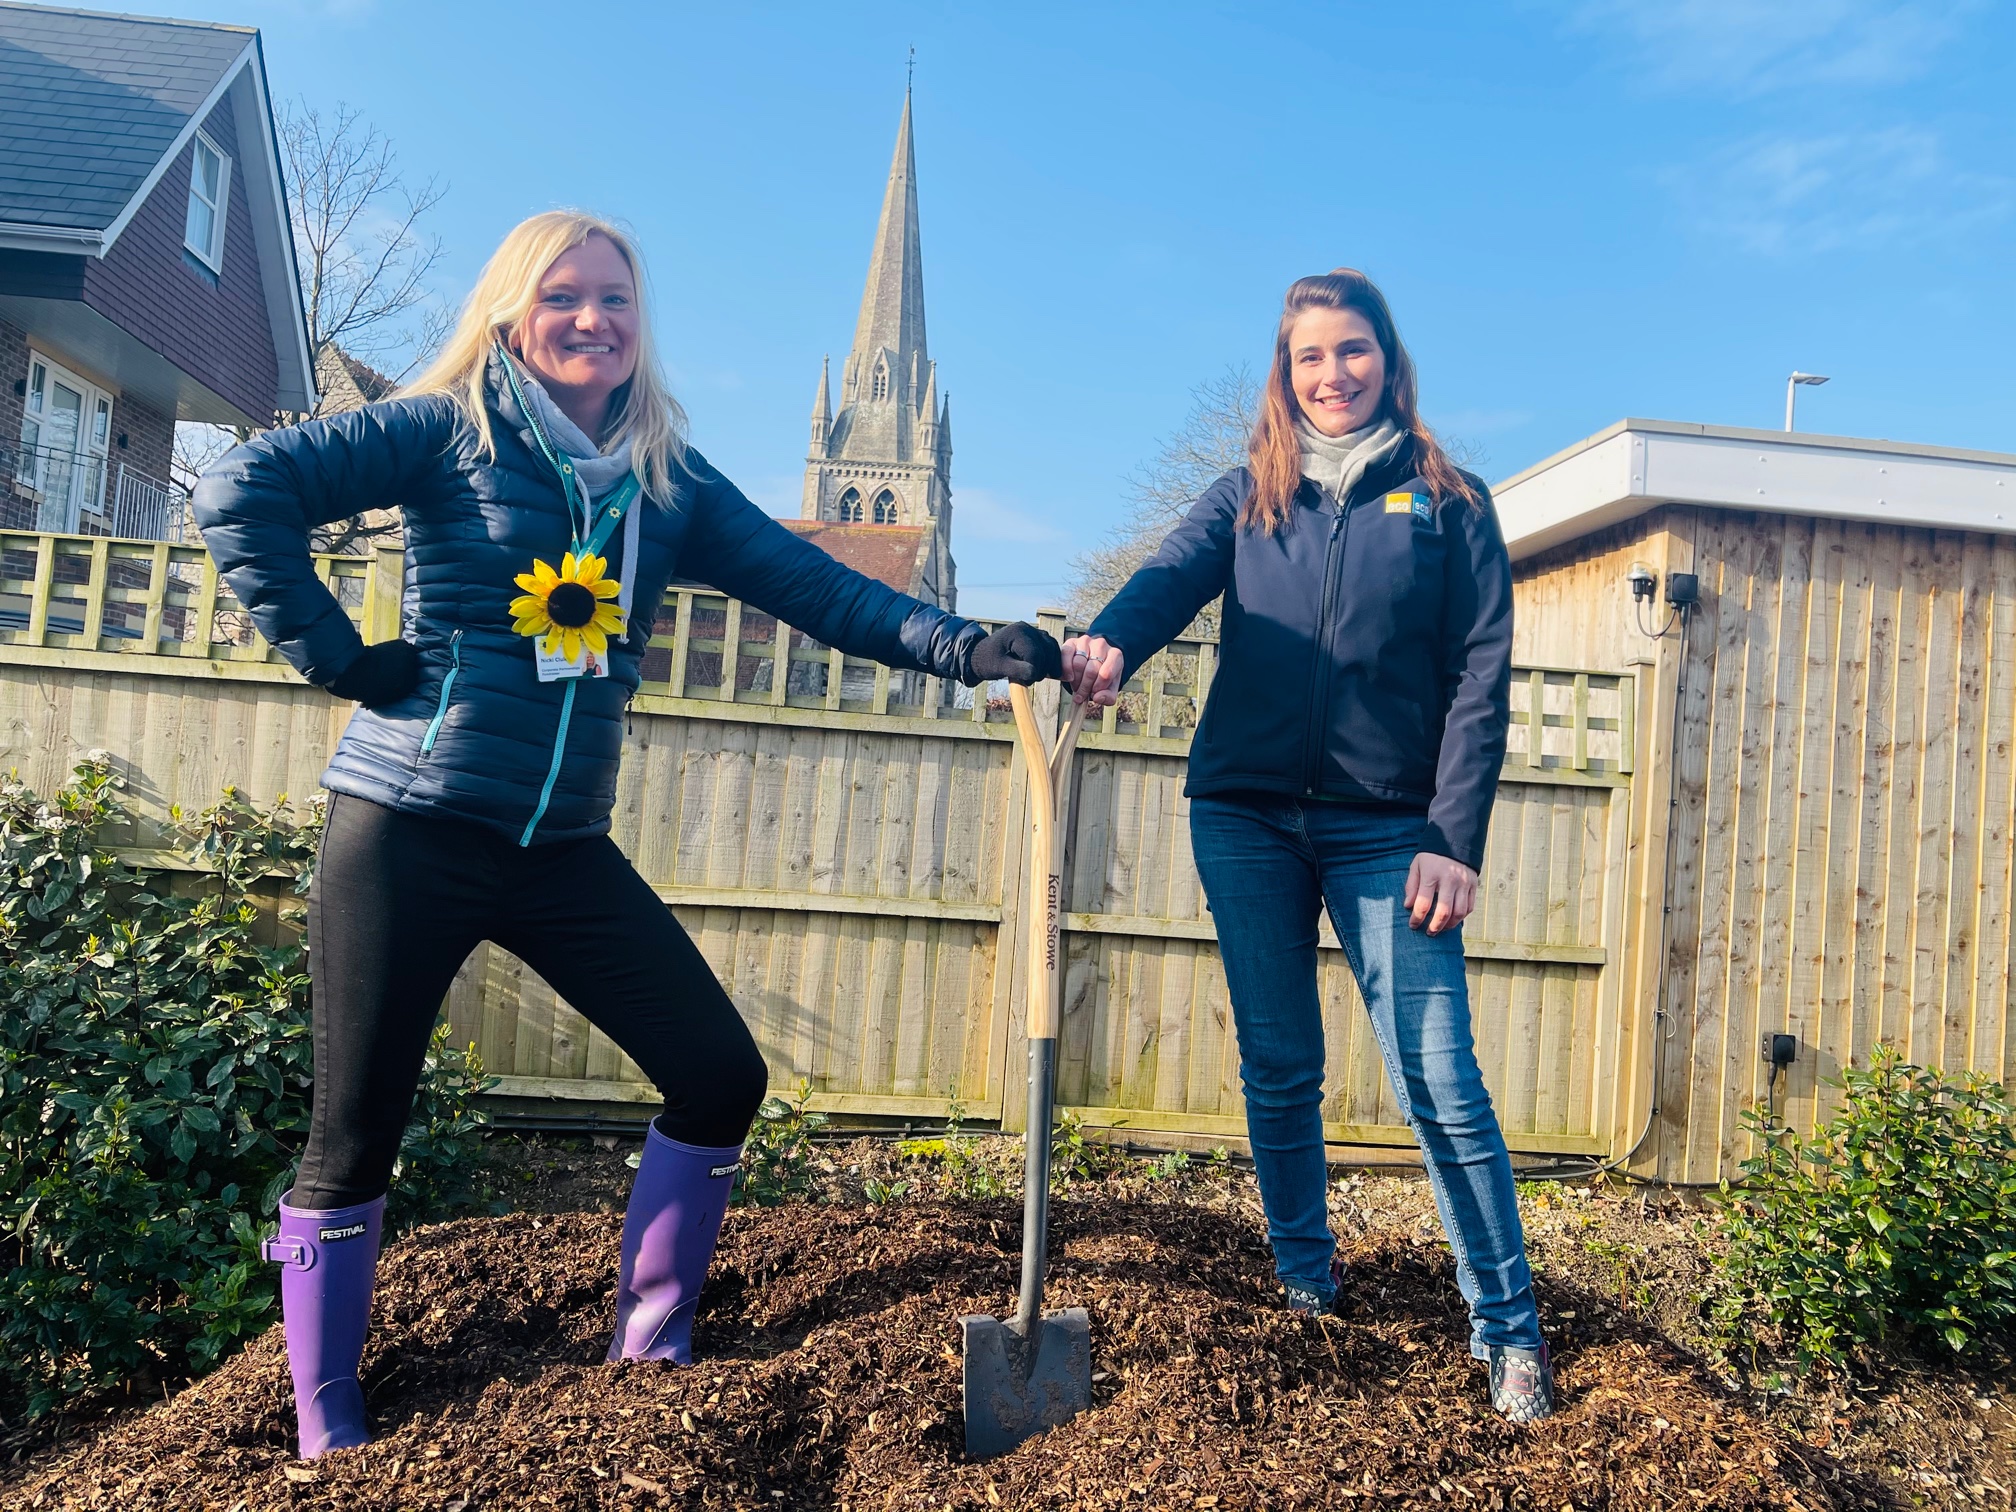 Eco Sustainable Solutions supports Lewis-Manning Hospice Care with mulch donation and announces the Poole based hospice as their nominated charity of the year